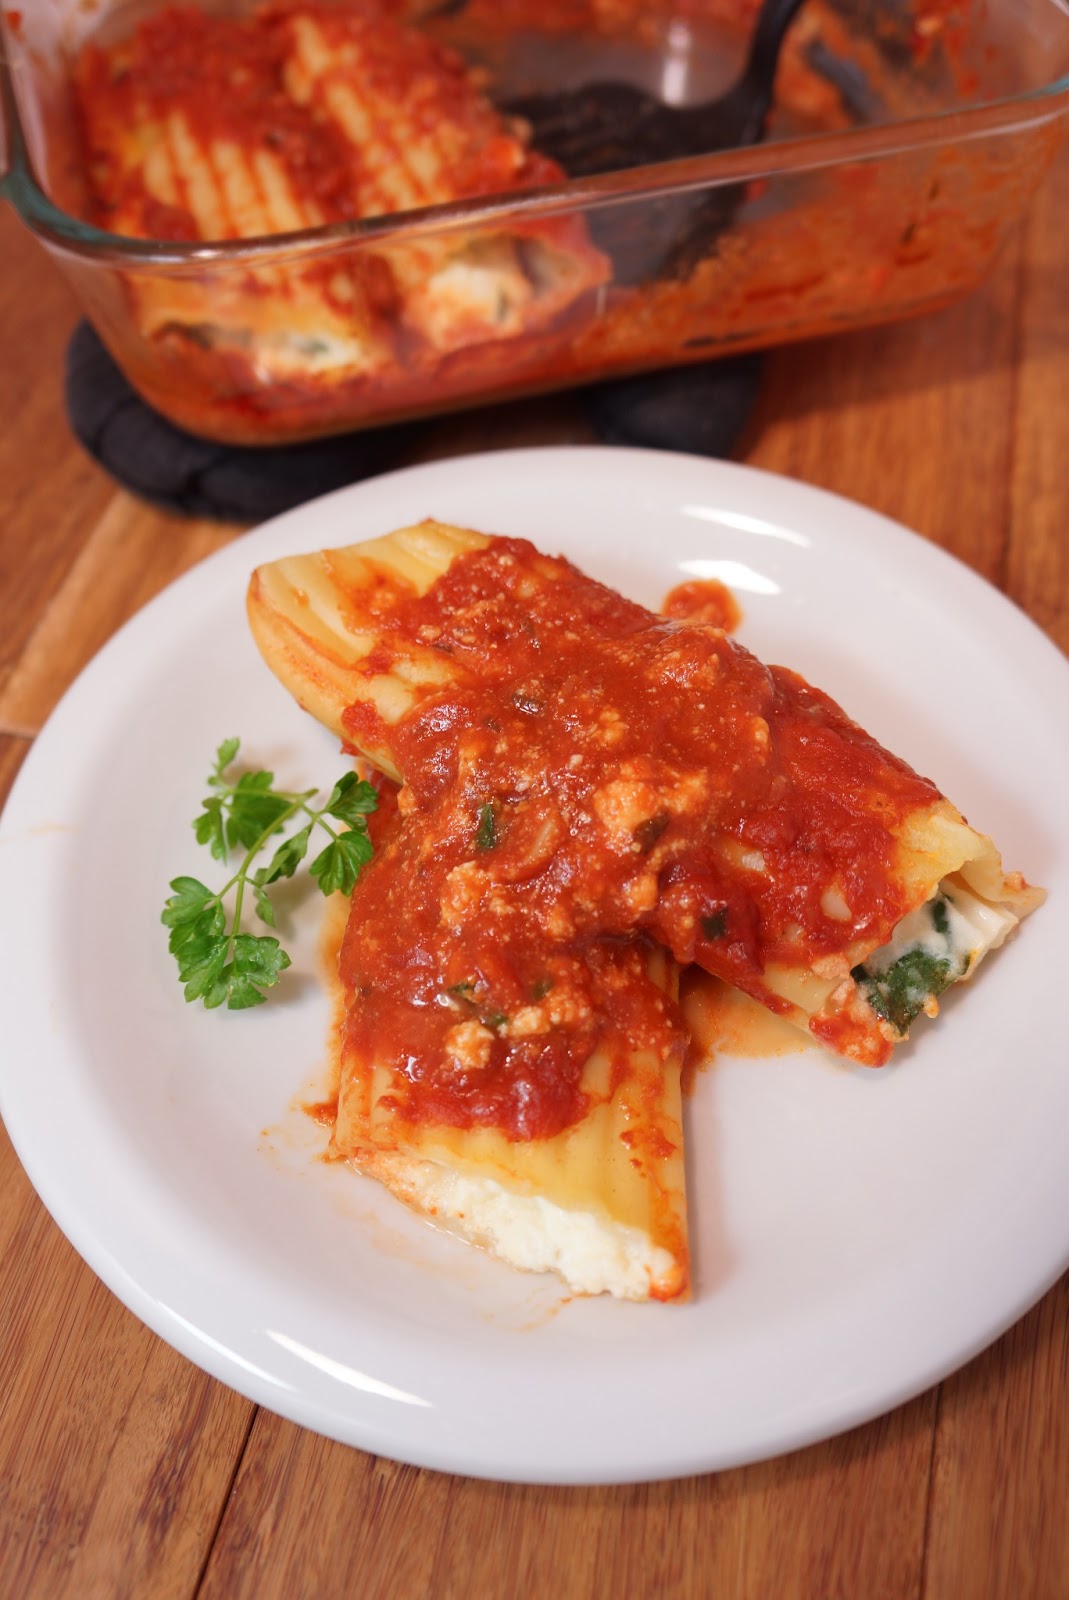 Manicotti - total time 40 minutes - Alley's Recipe Book